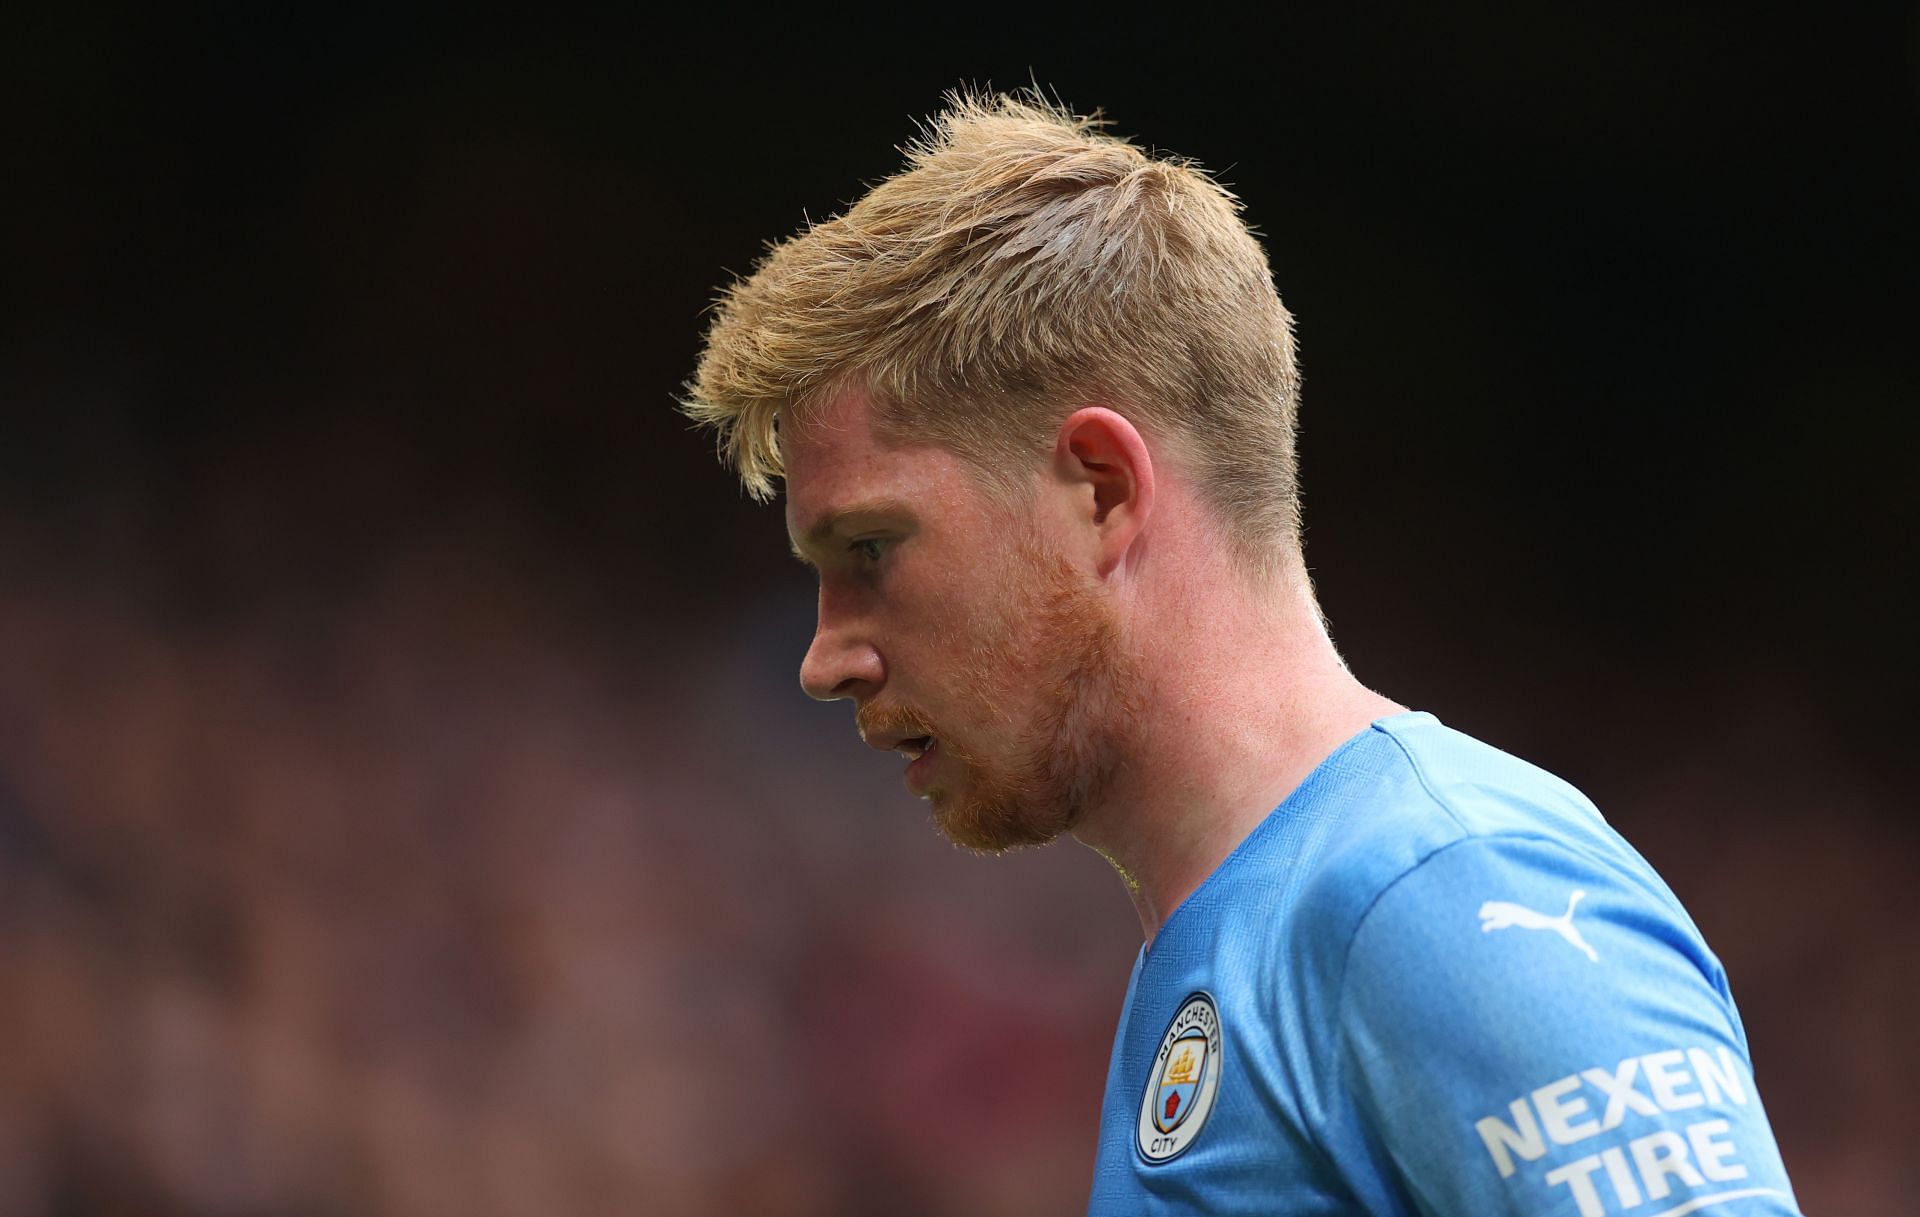 Kevin De Bruyne failed to live up to his hype at Chelsea.